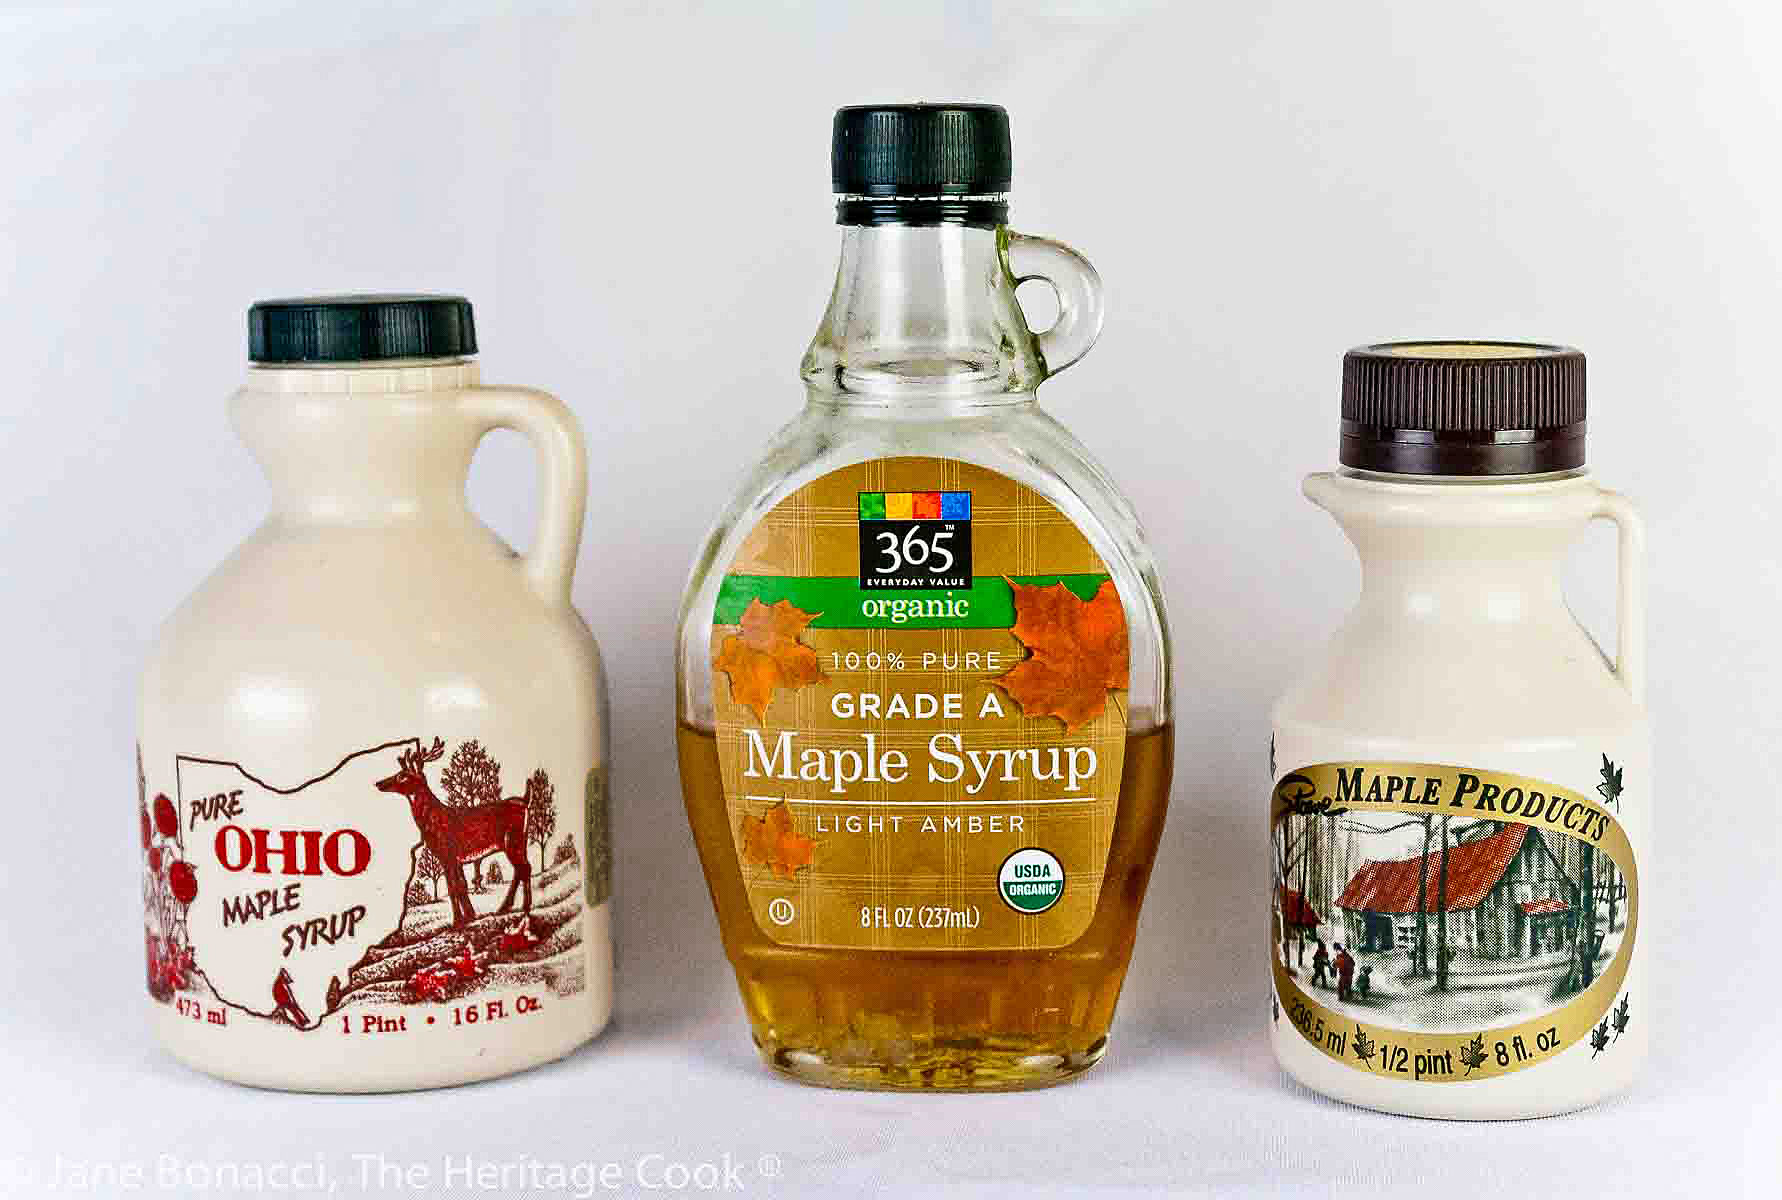 3 different bottles of maple syrup. 